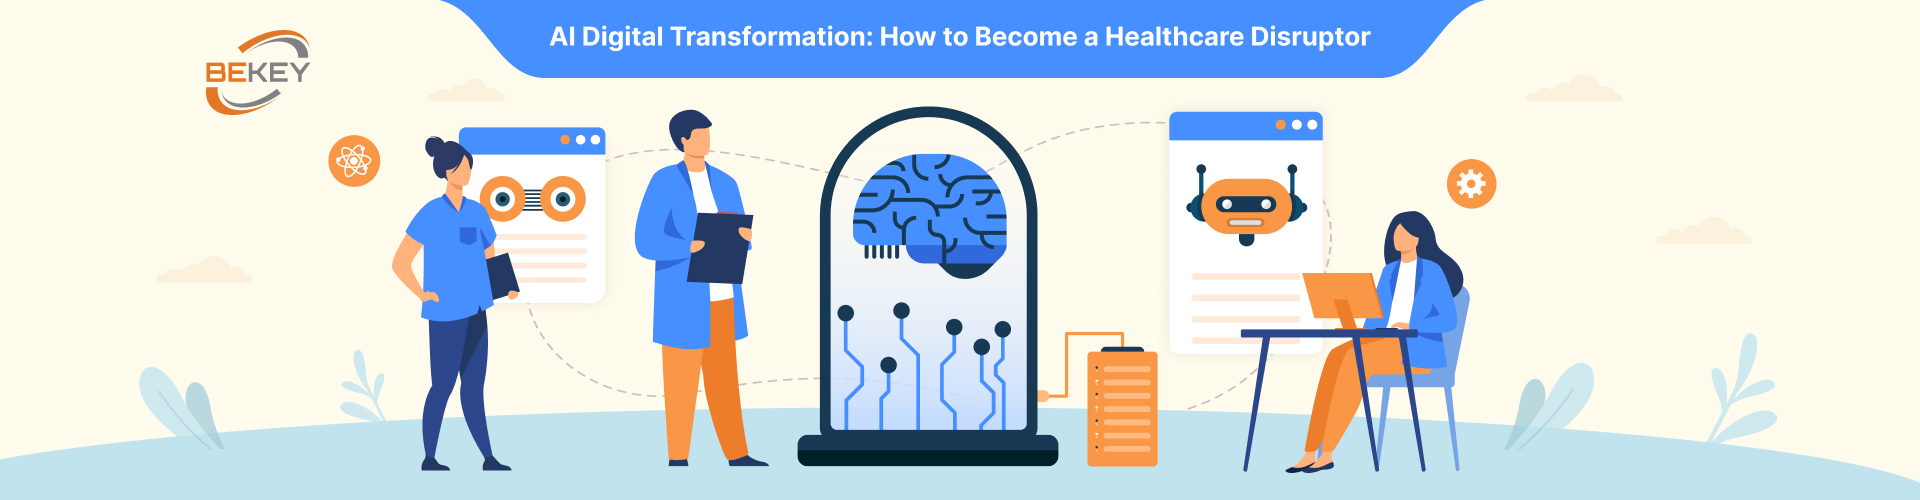 AI Digital Transformation: How to Become a Healthcare Disruptor - image